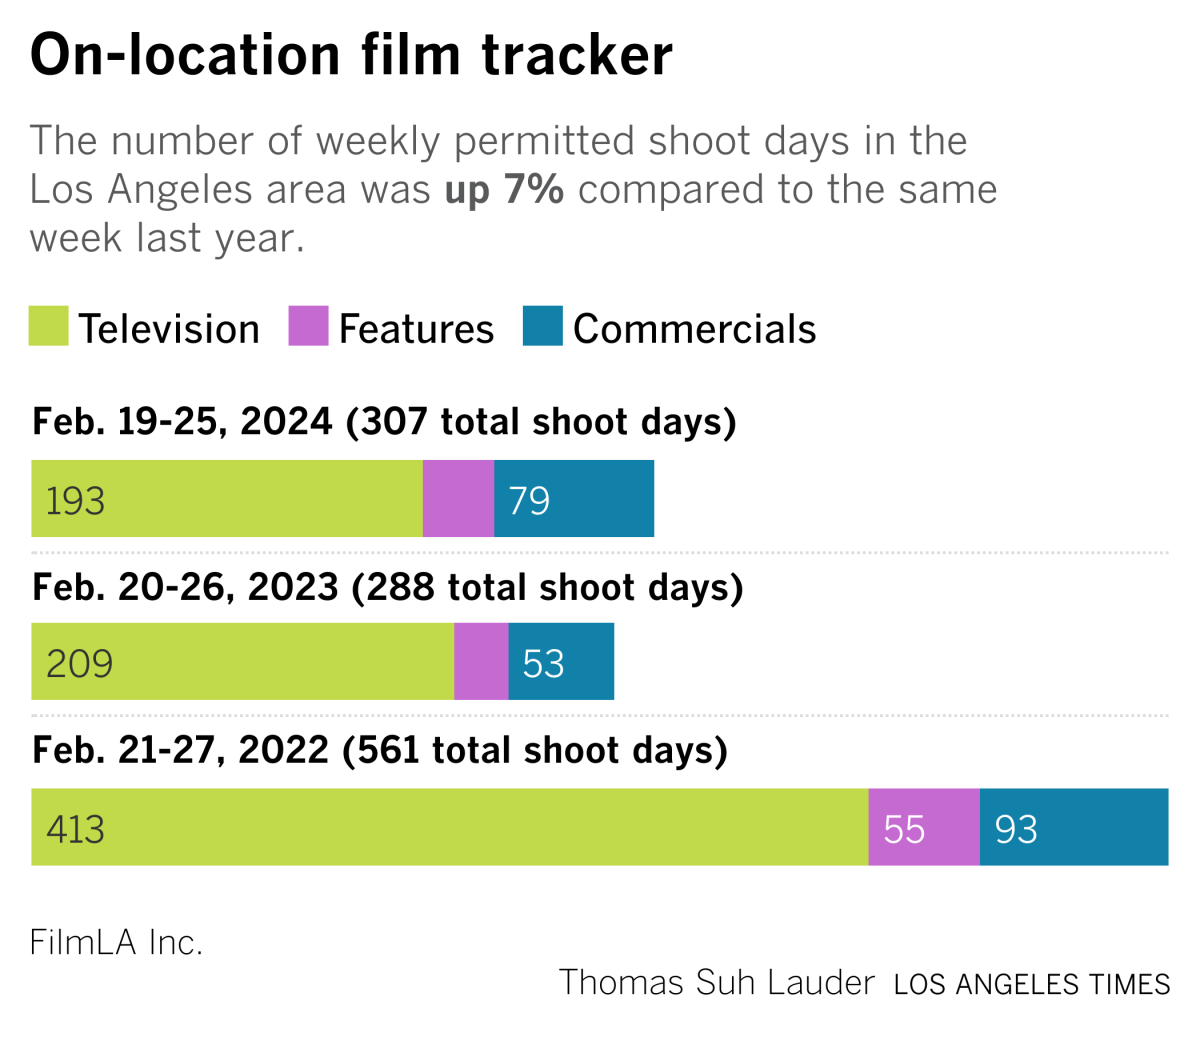 A chart showing on-location shooting days in the Los Angeles area